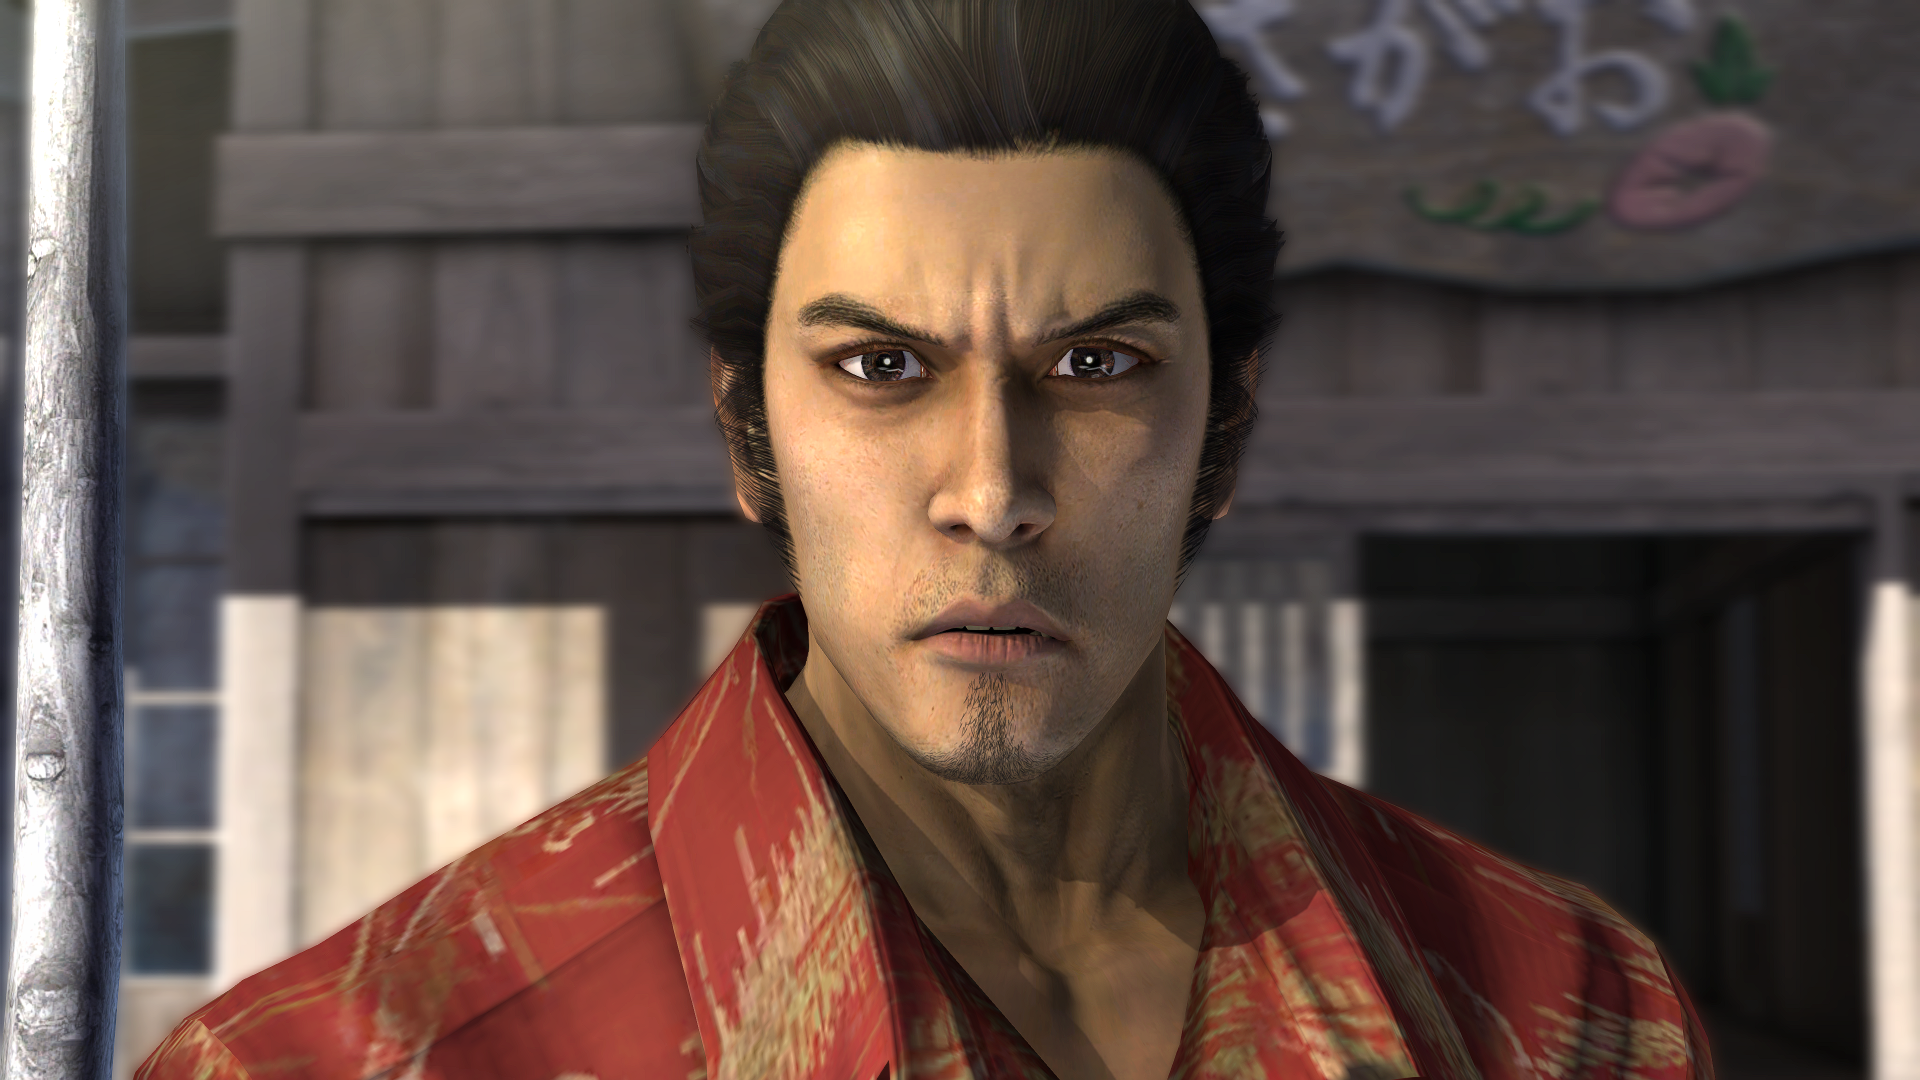 Yakuza: Like a Dragon was heavily inspired by One Piece